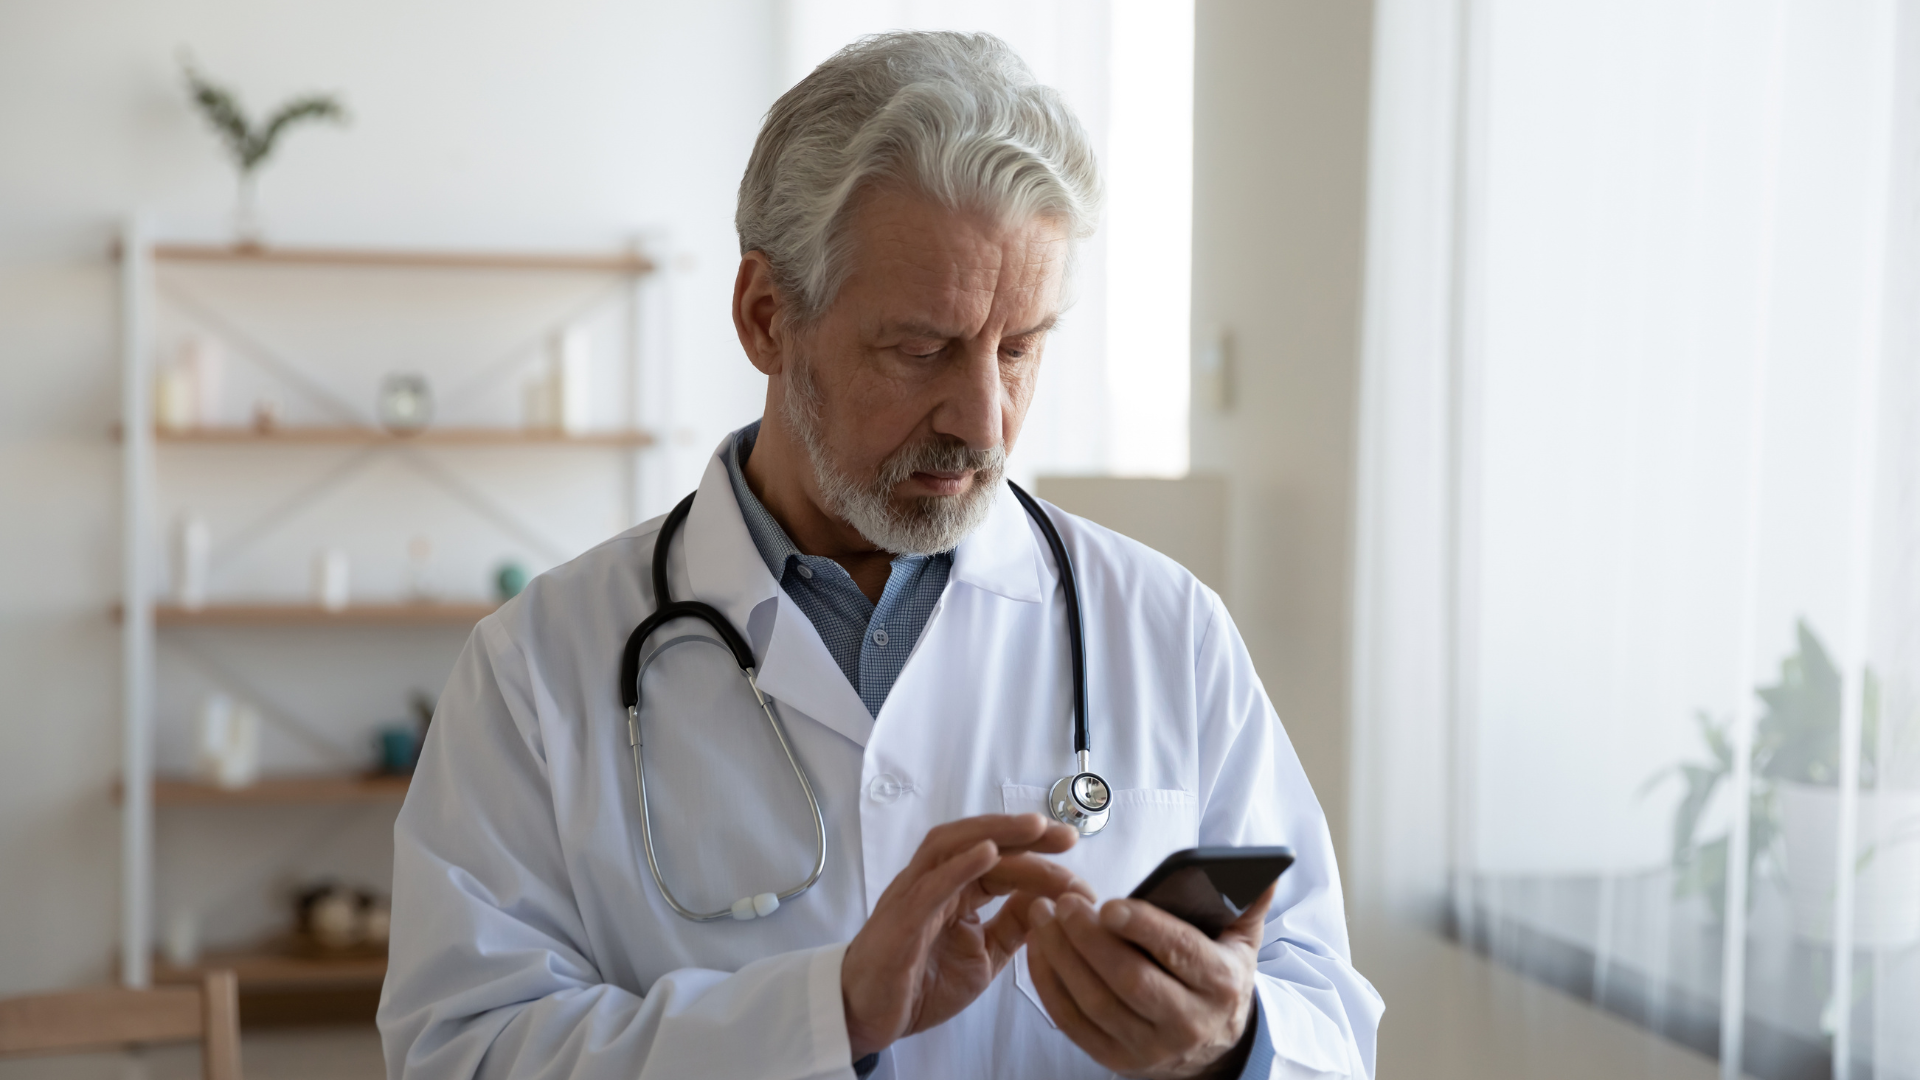 the future of telehealth appointments